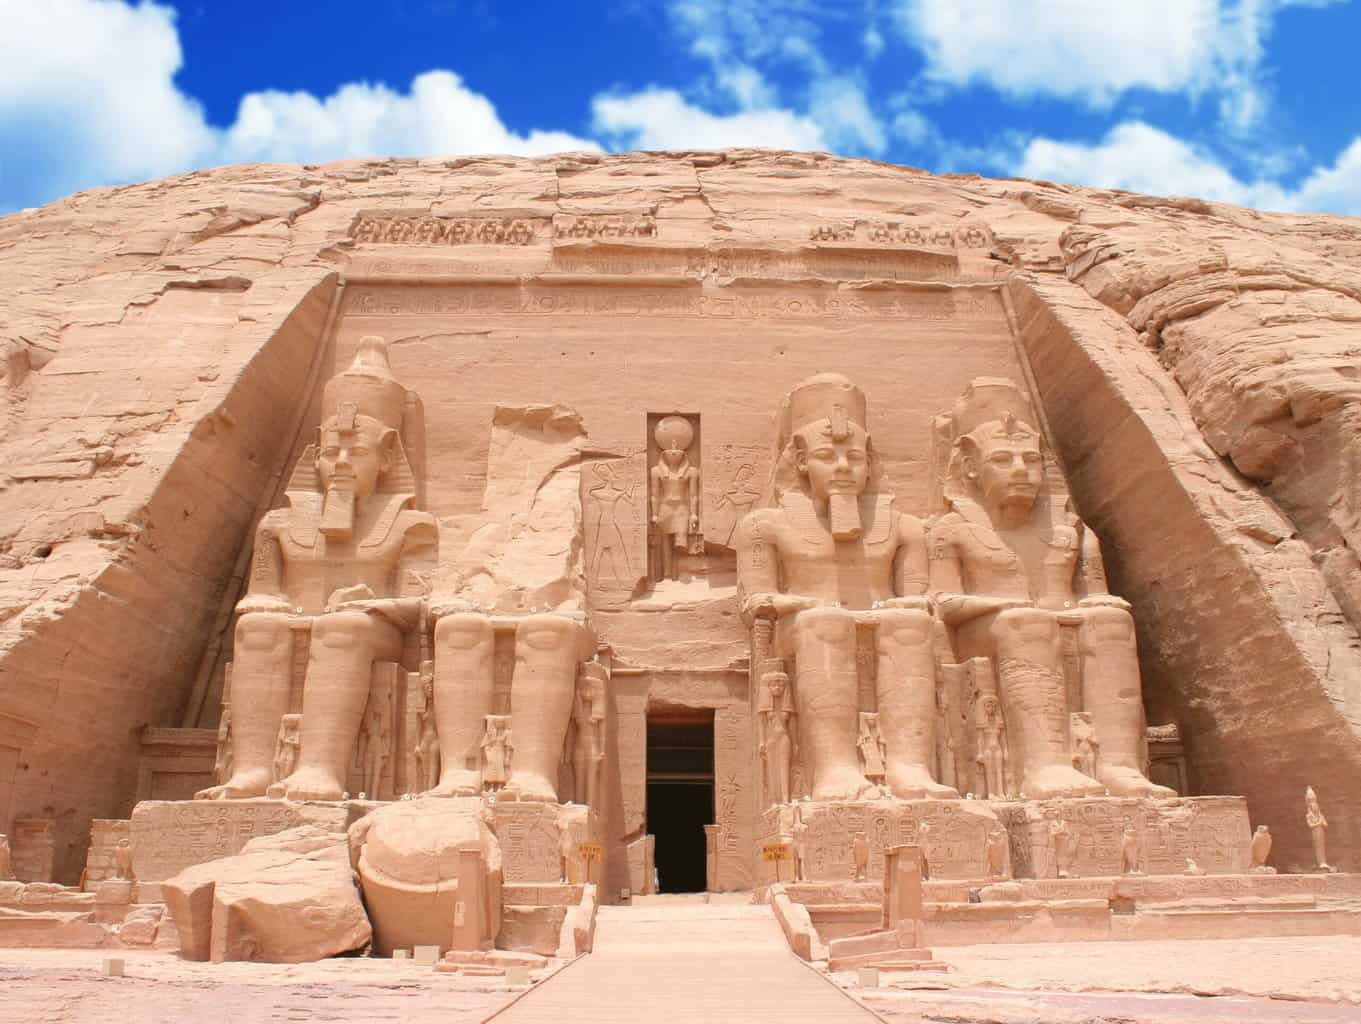 Abu Simbel Temple min scaled Every city in Egypt has its unique character and has specific elements that make it special, whether it’s a coastal city, somewhere along the Nile, or even in the middle of the desert. Every city has many locations that offer its visitors a variety of activities and attractions or are simply perfect for relaxation and a laid-back holiday getaway.